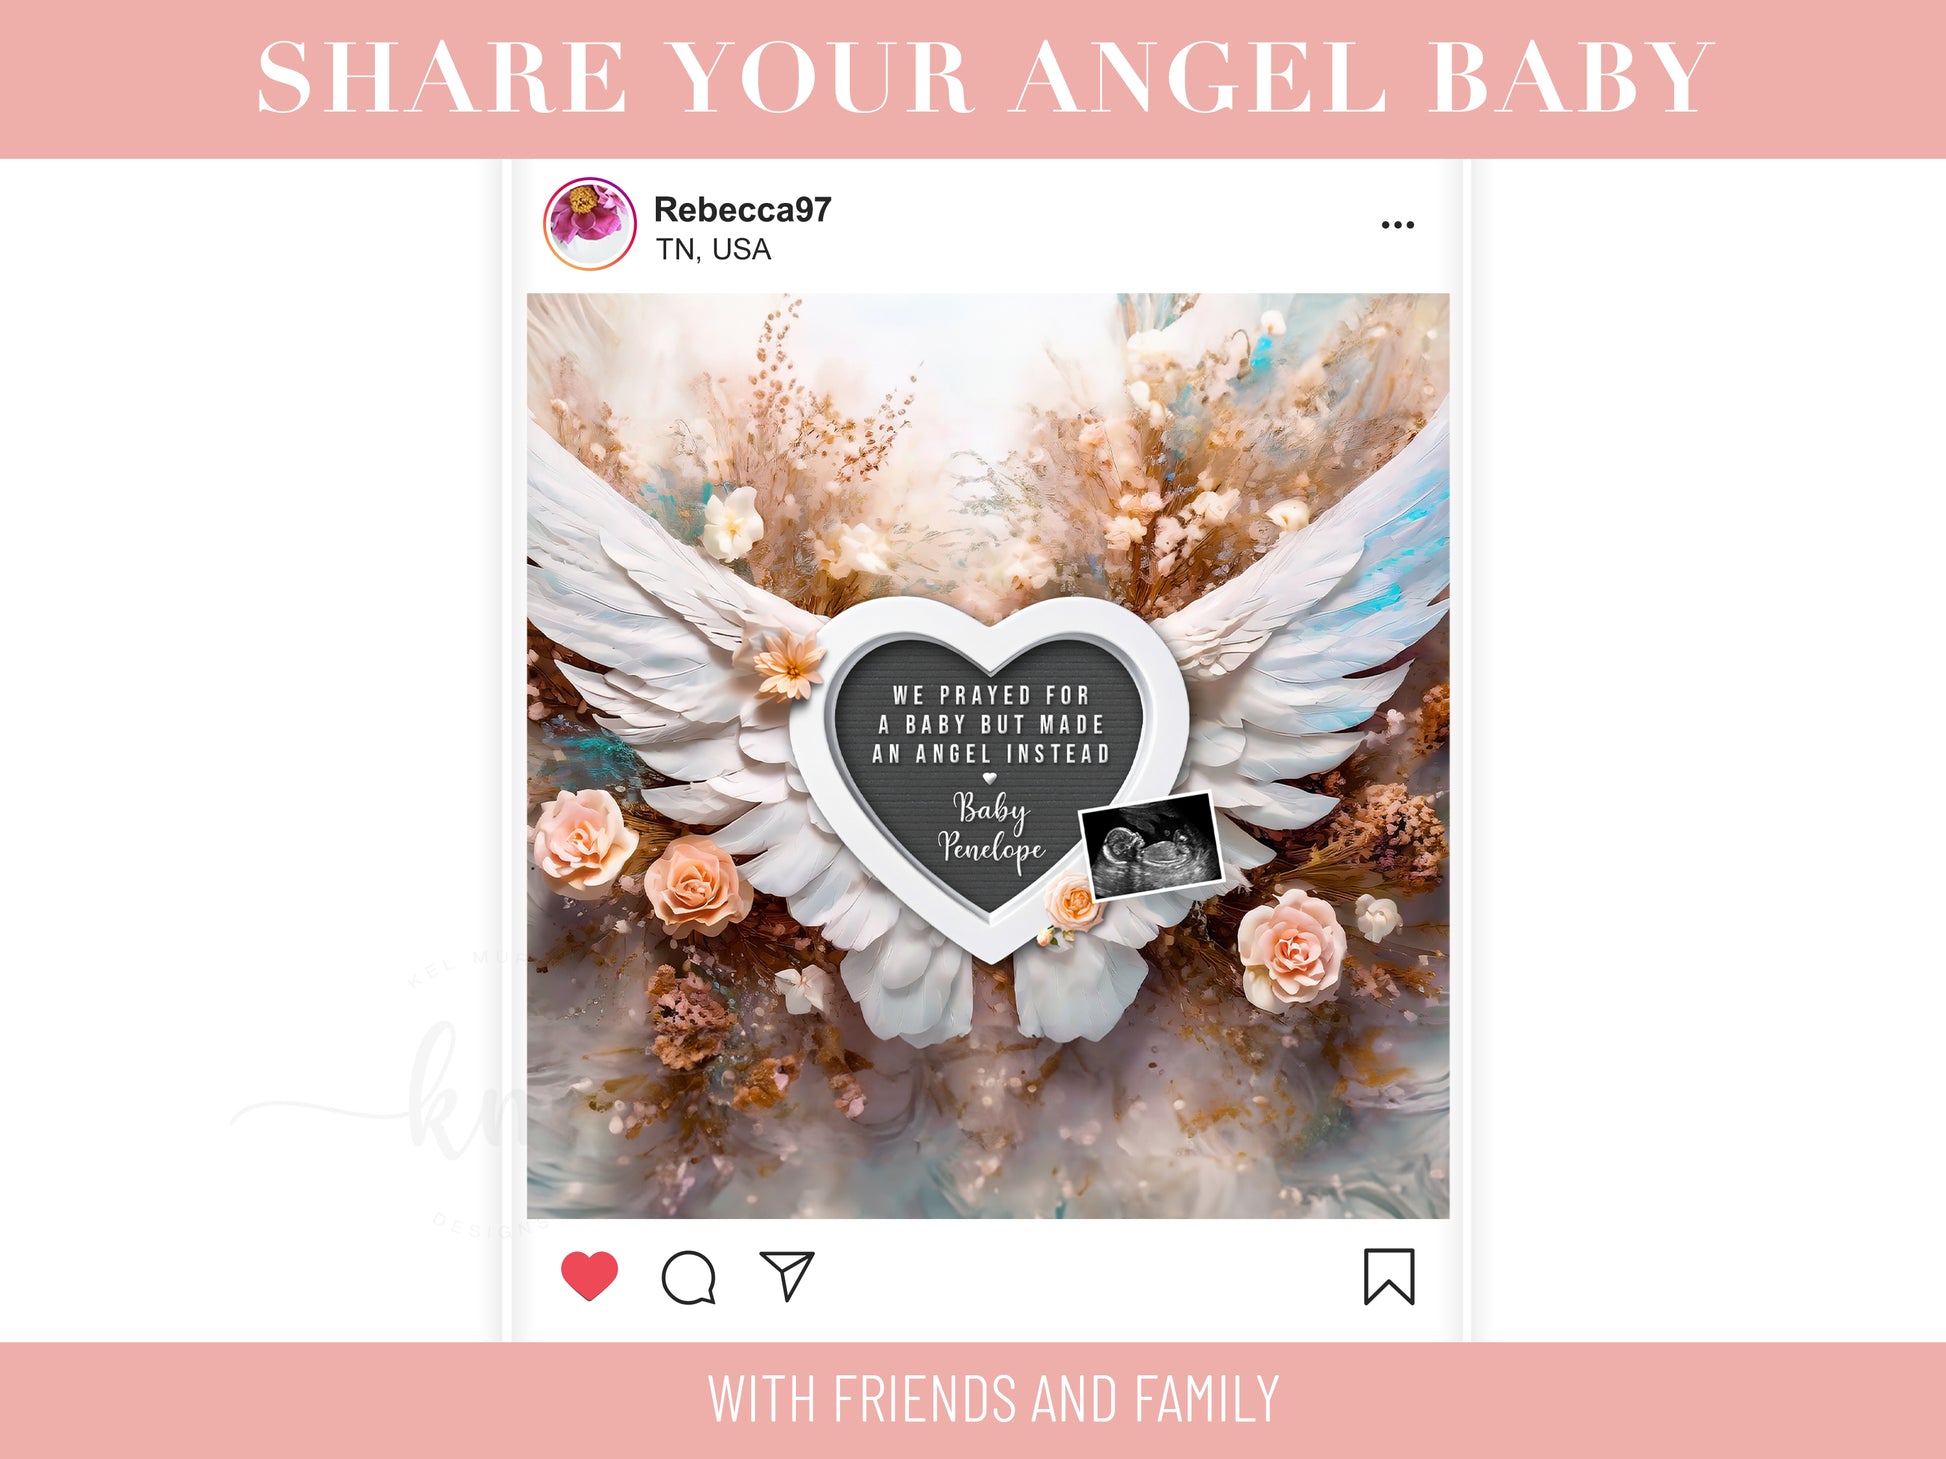 Pregnancy Loss Announcement for social media with Angel Wings, Peach Roses, and a Heart letter board that says "We prayed for a baby but we made an angel instead"